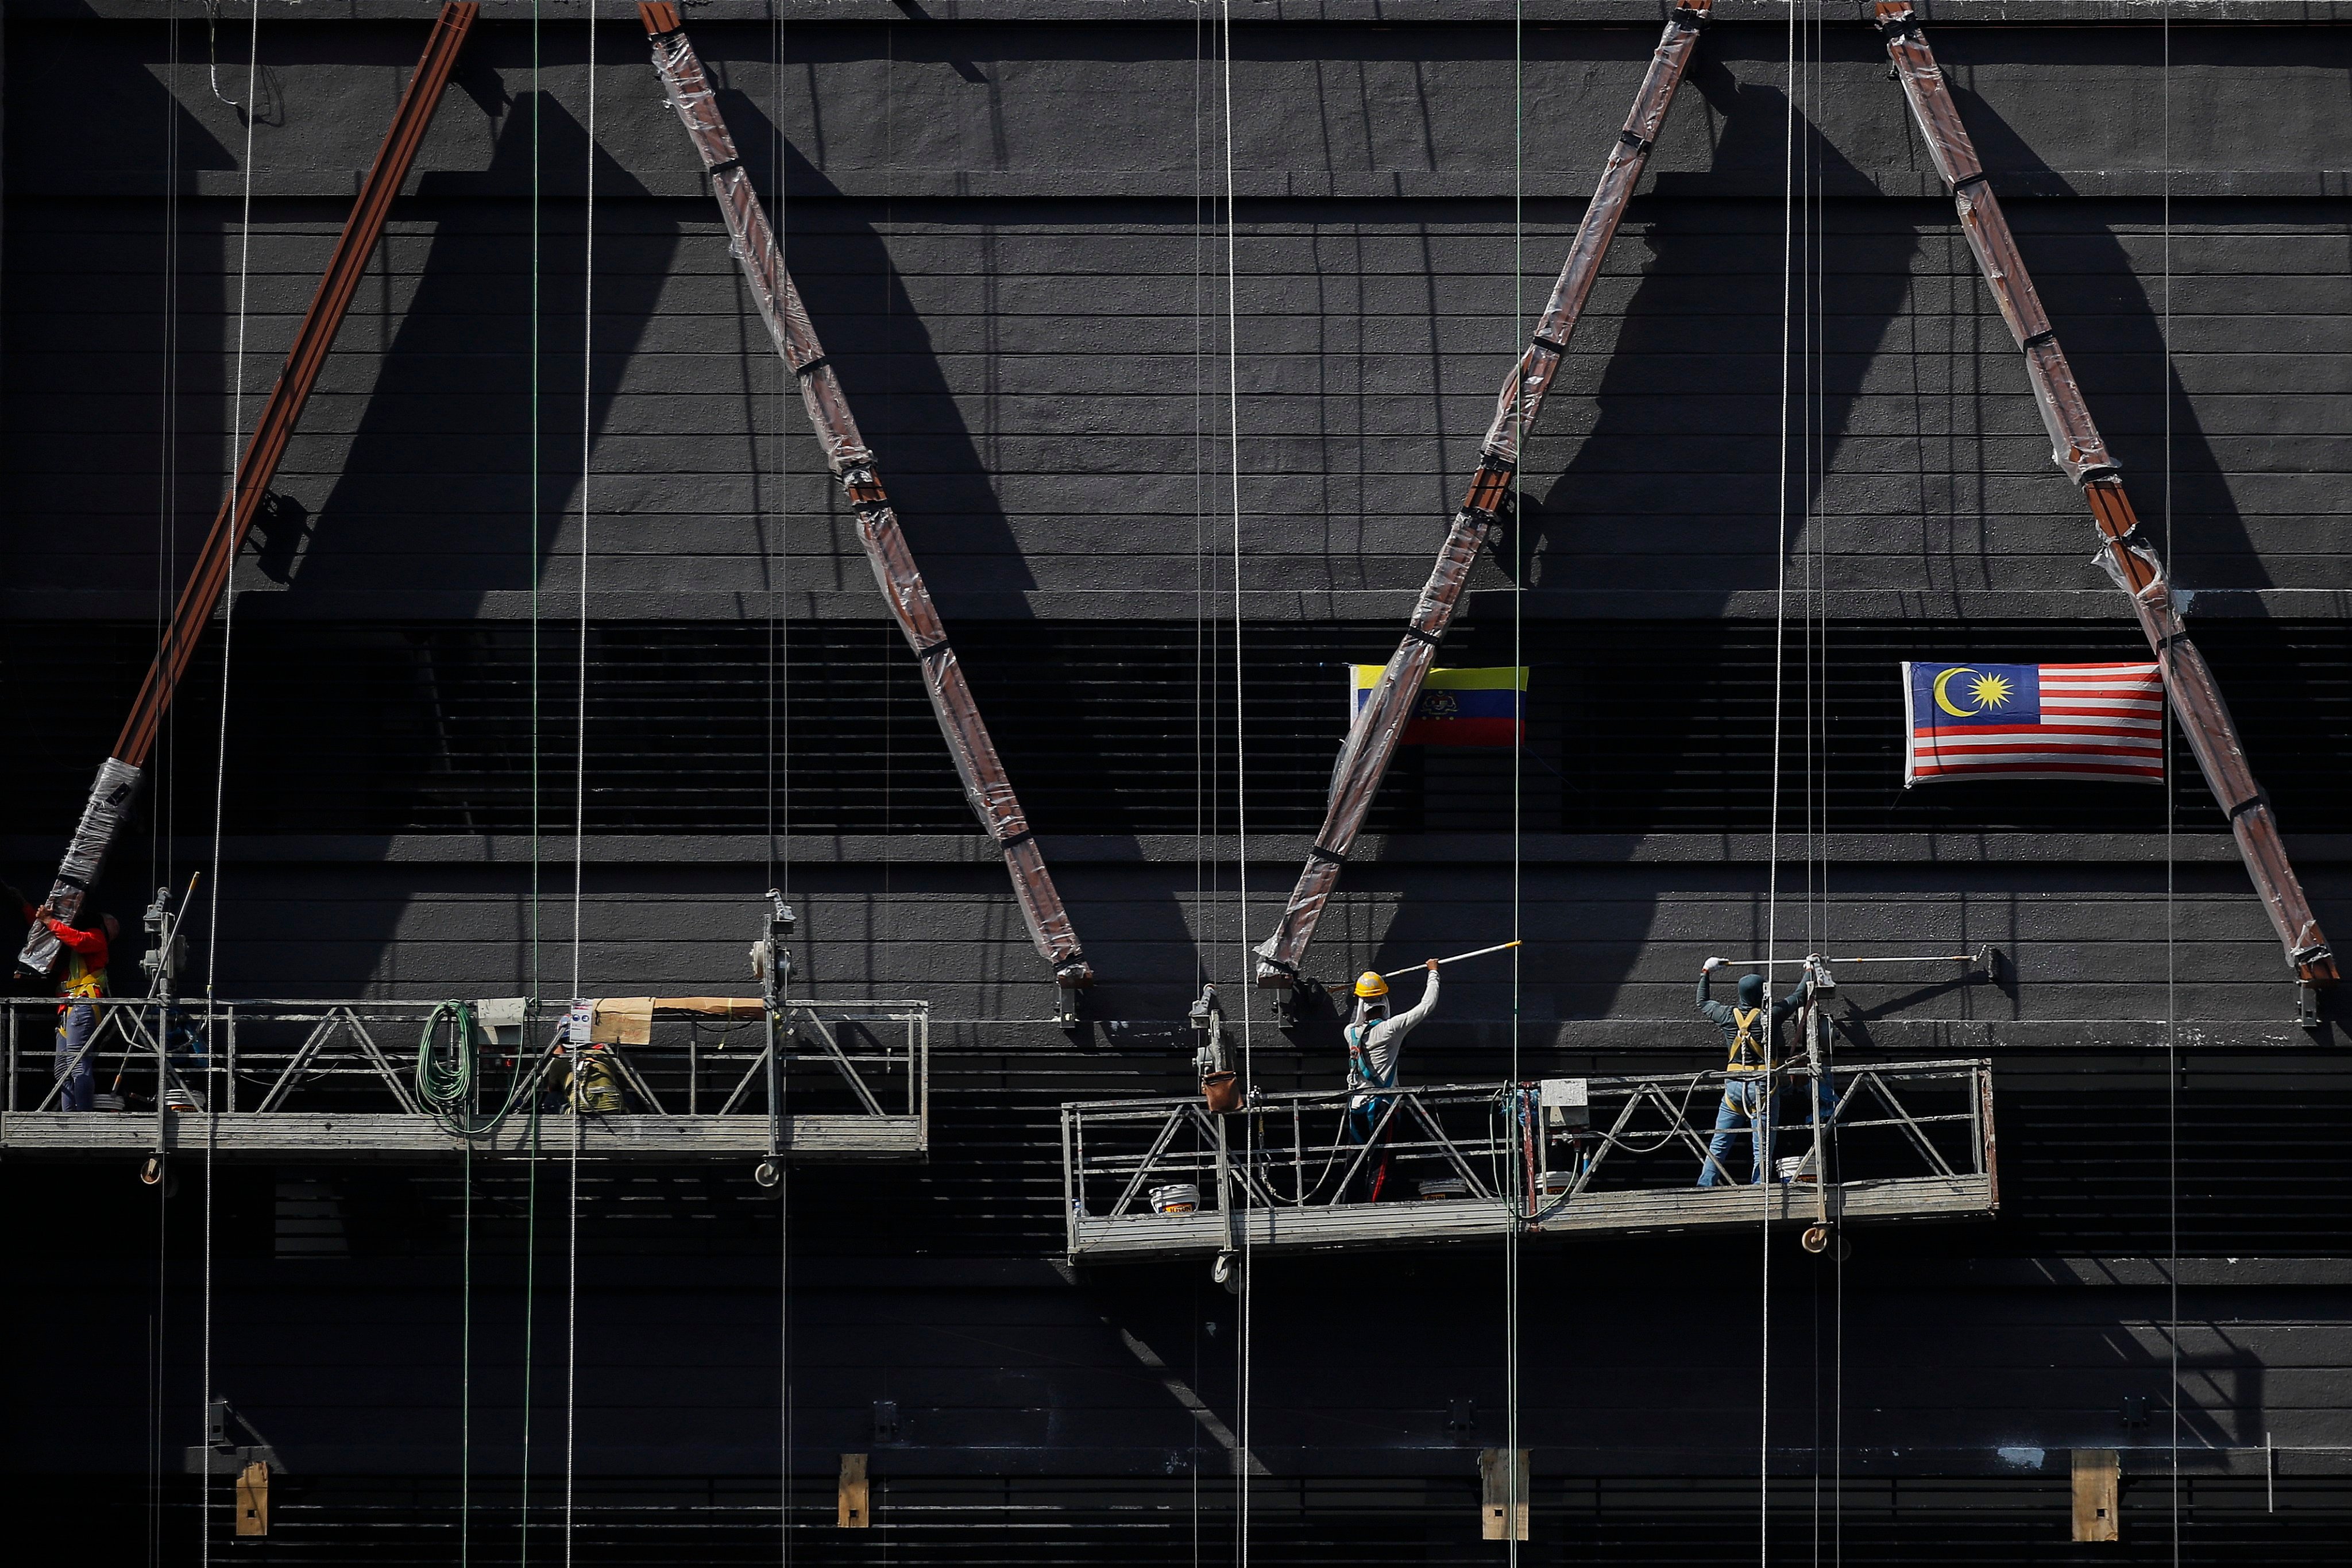 Construction workers paint a building in Kuala Lumpur. Malaysia has been in the spotlight for months over allegations that forced labour, debt bondage and scam jobs have riddled its recruitment market for foreign labour. Photo: EPA-EFE